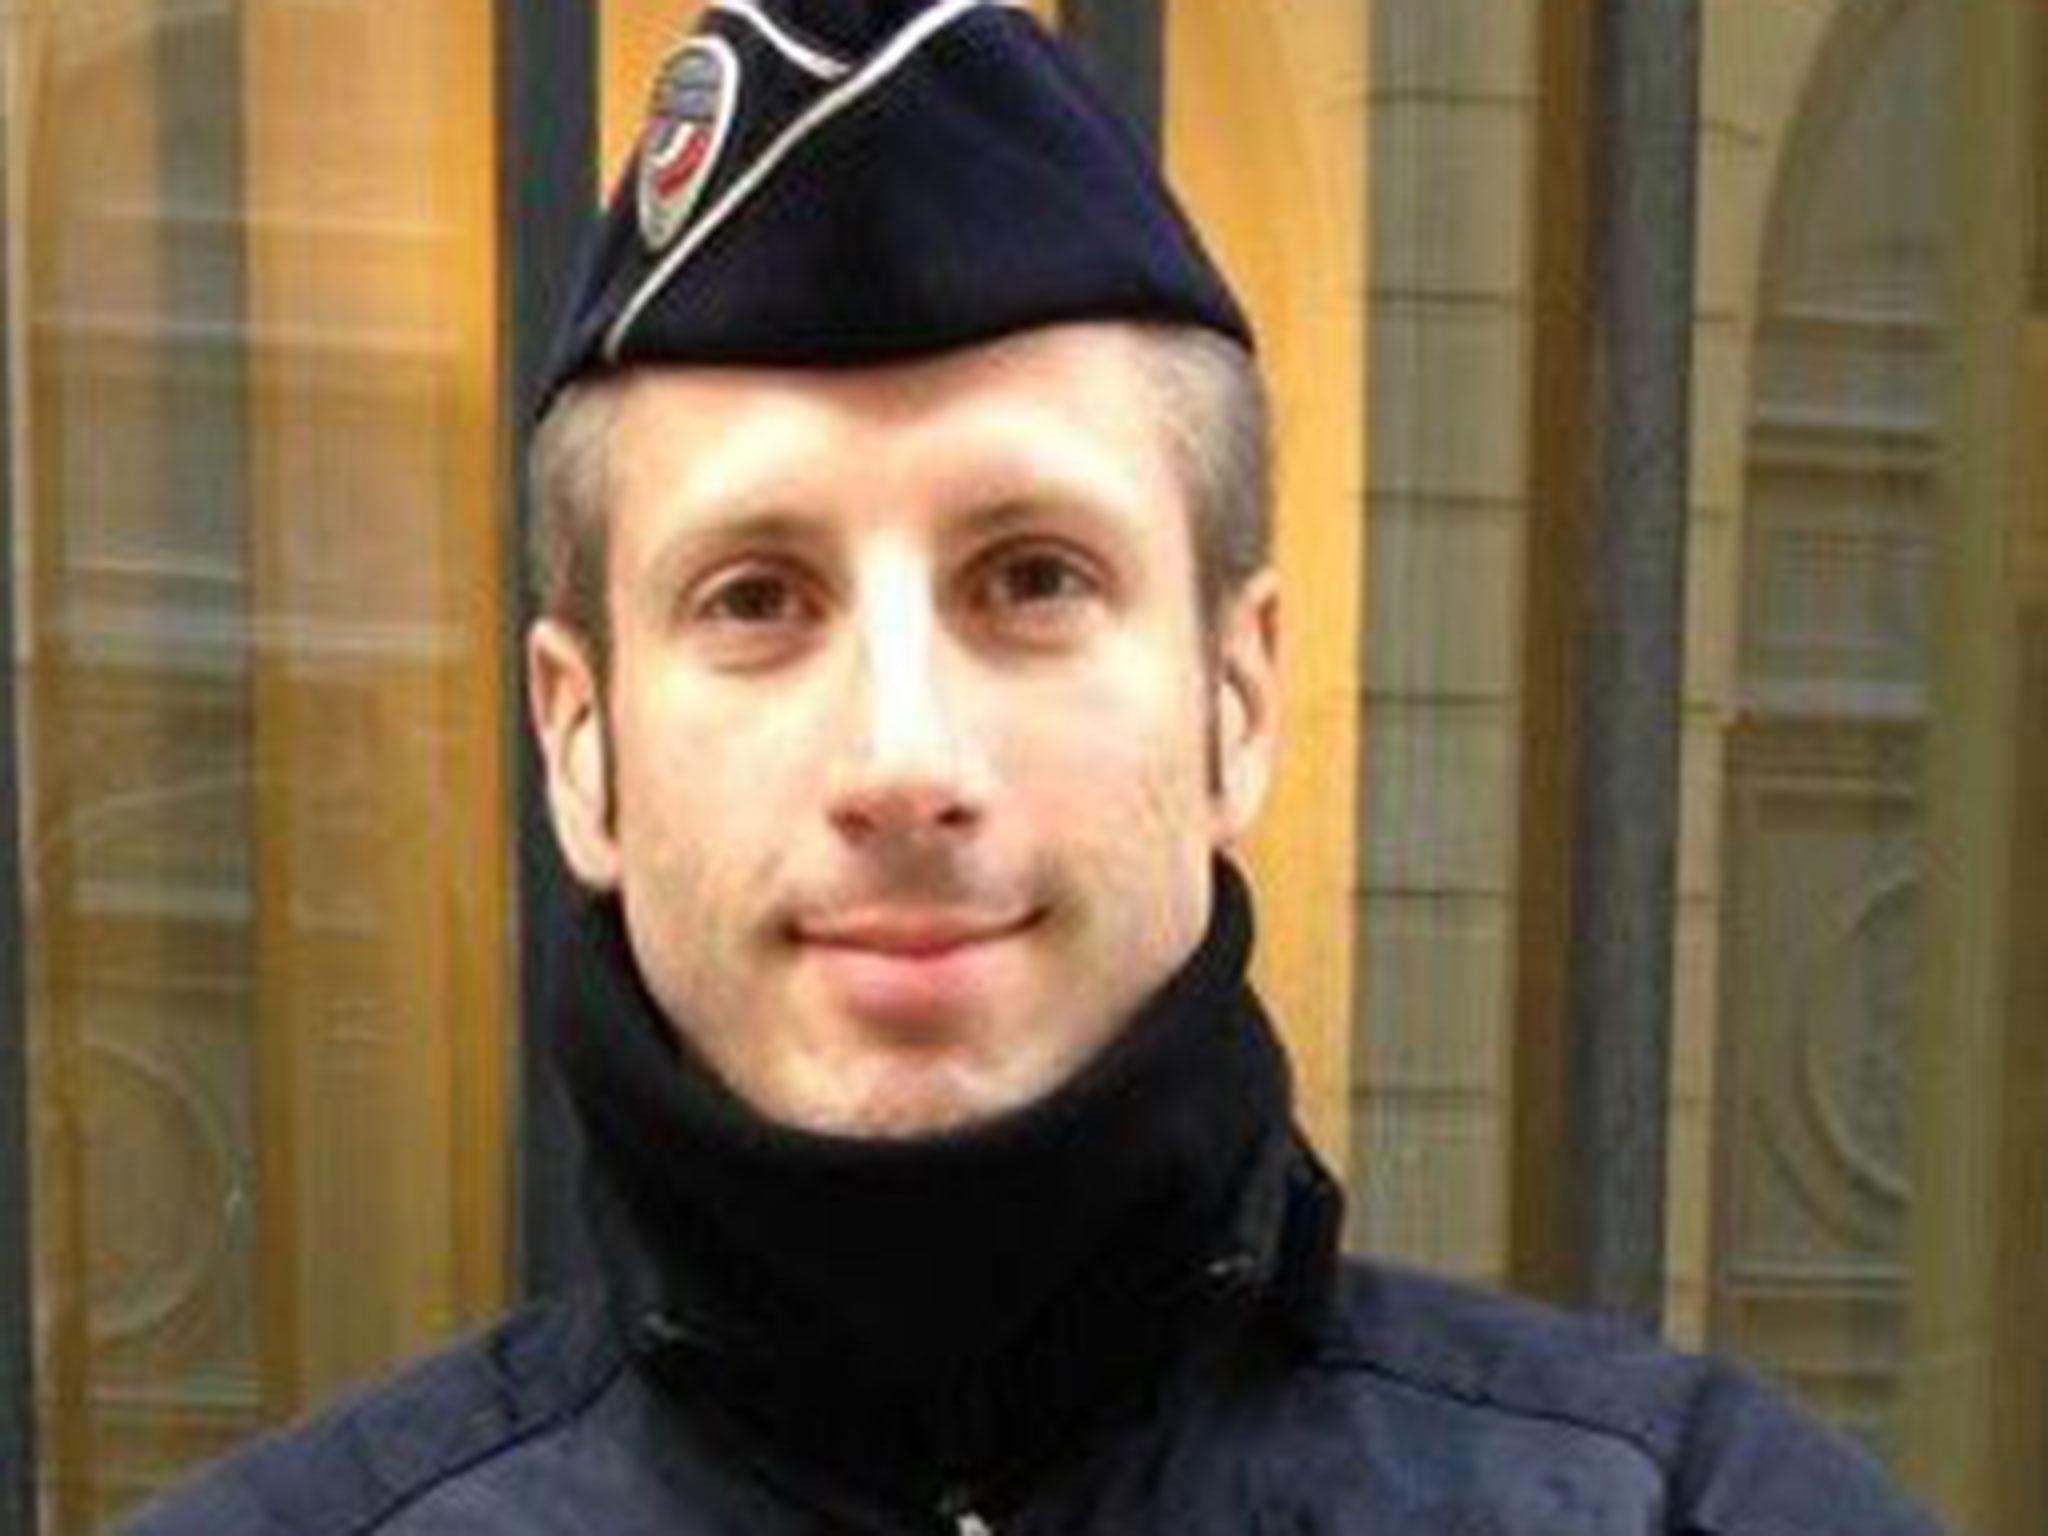 The tour started at the point where French police officer Xavier Jugelé was shot dead in April